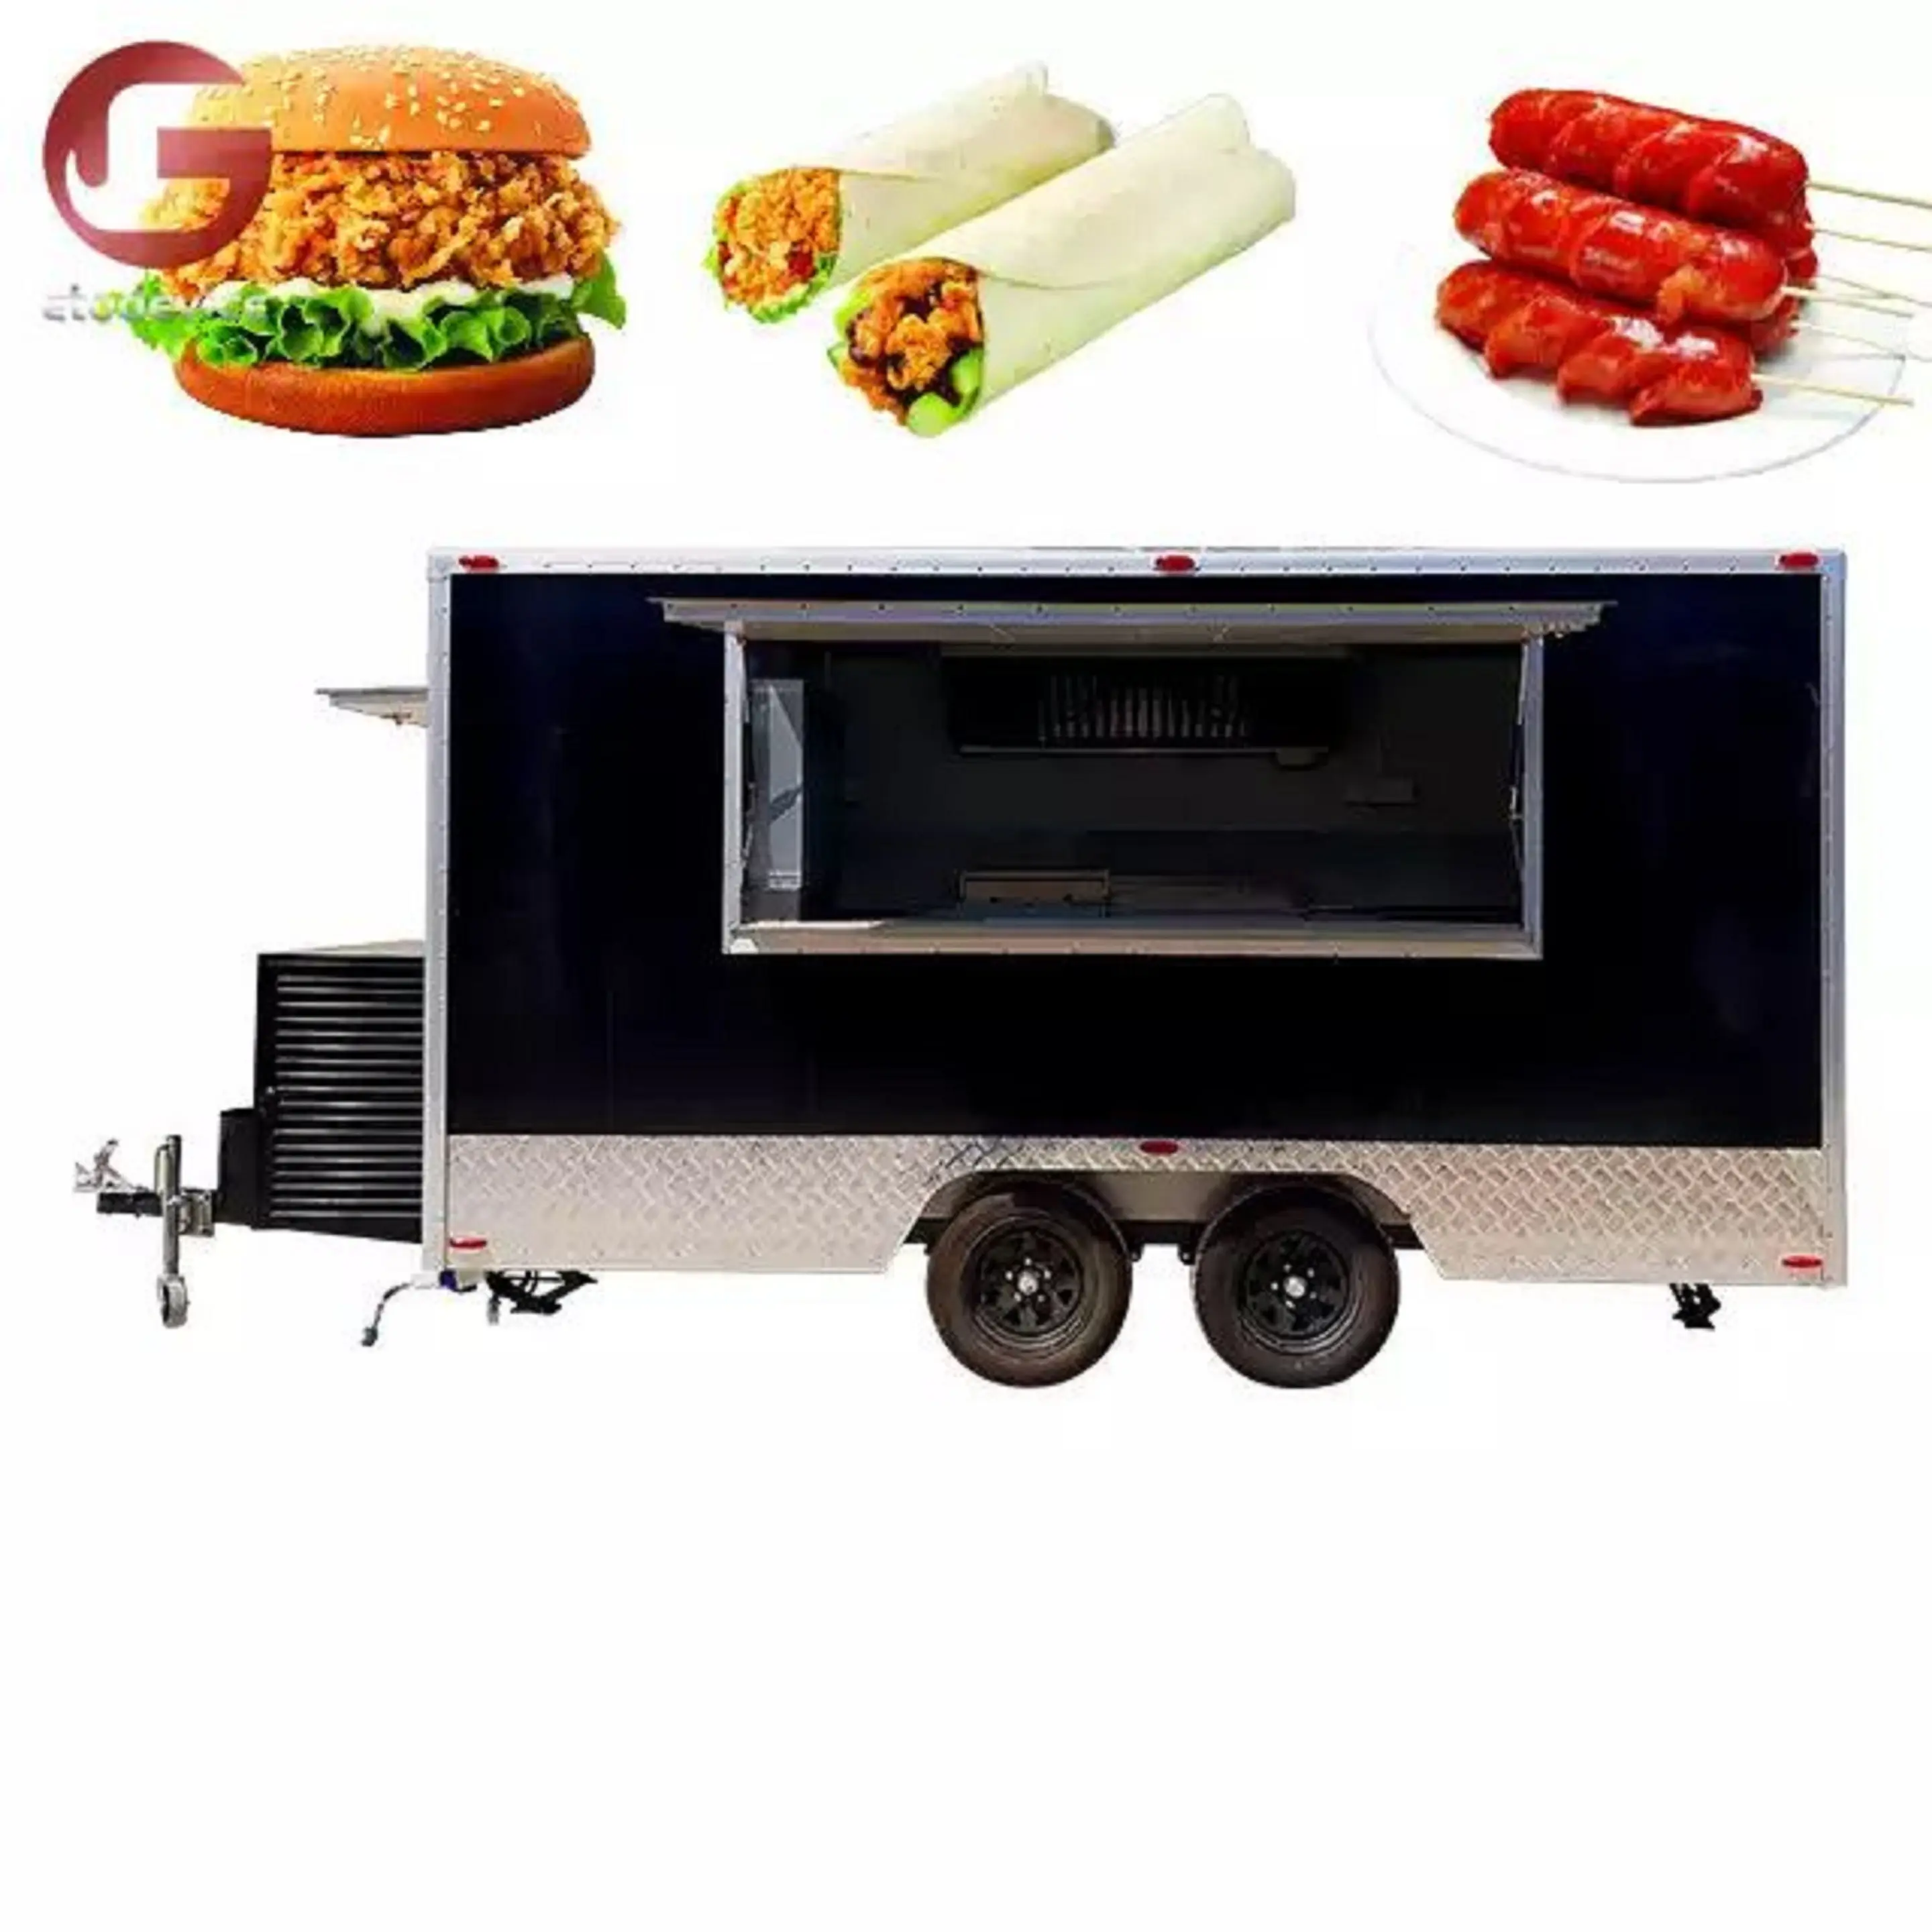 American Popular Street Outdoor Fast Food carrelli Crepe Food truck con Snack mobile kitchen